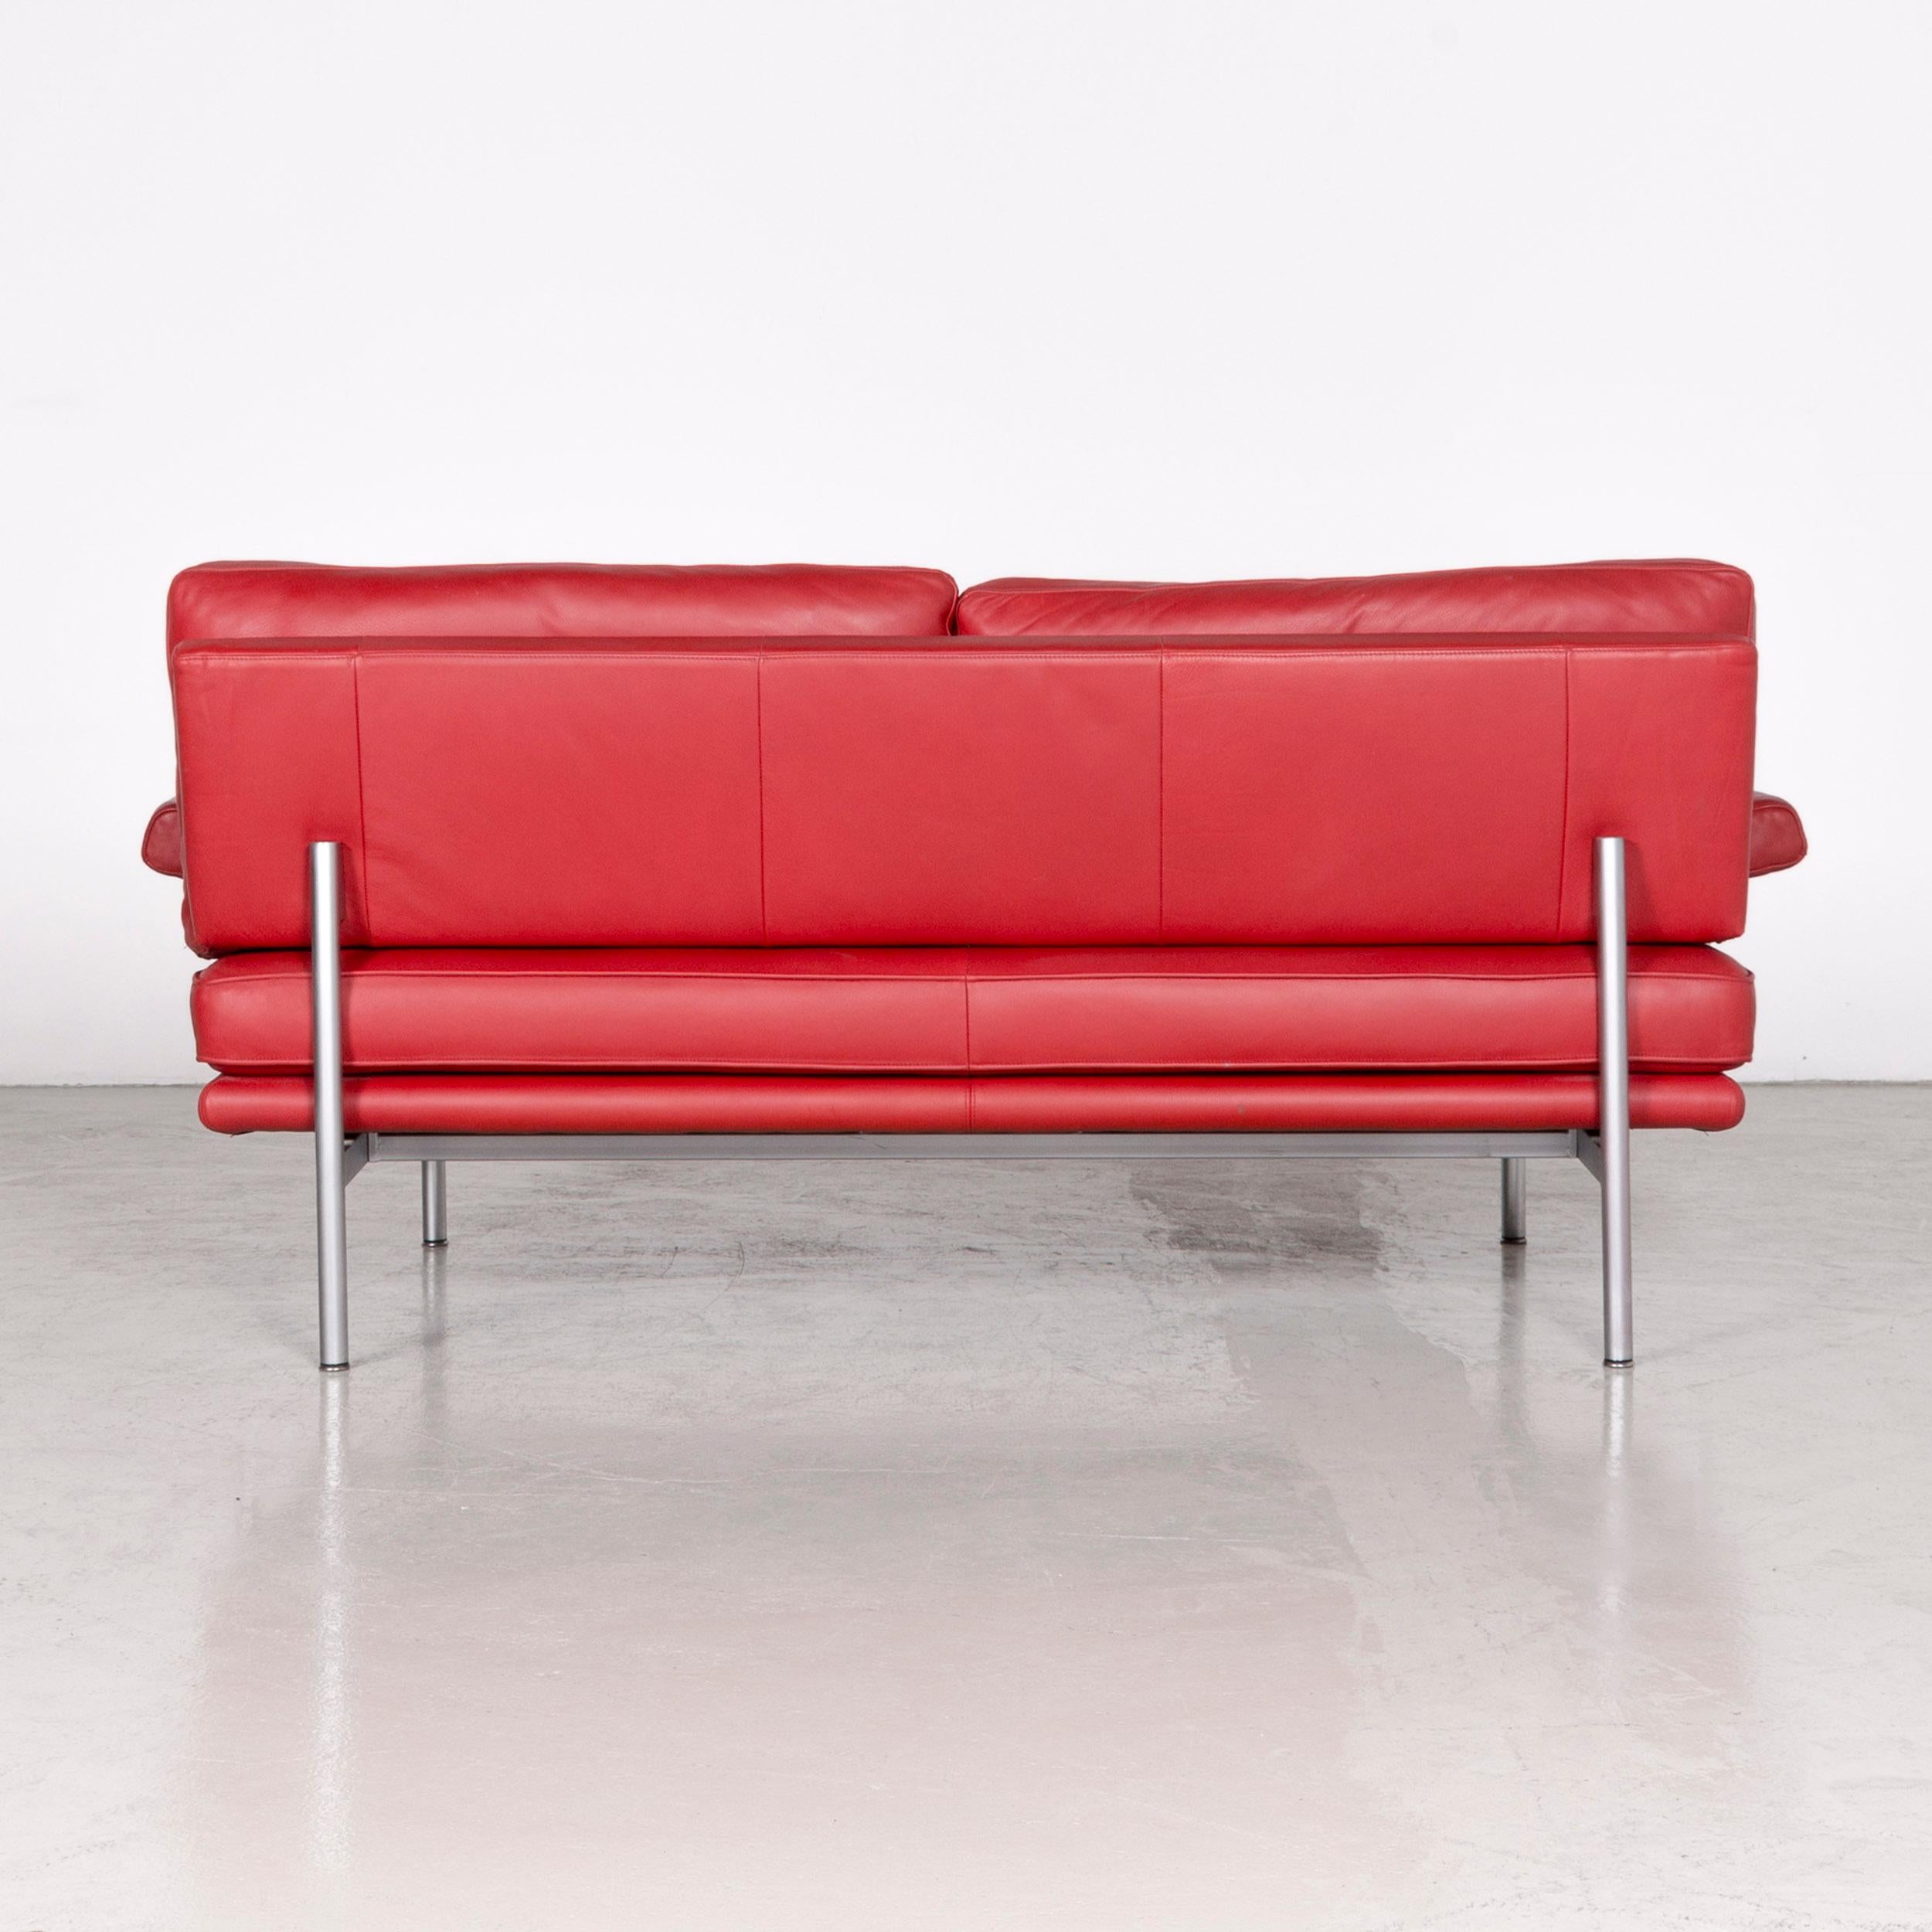 Walter Knoll Living Platform Designer Leather Couch Red by EOOS Design For Sale 3